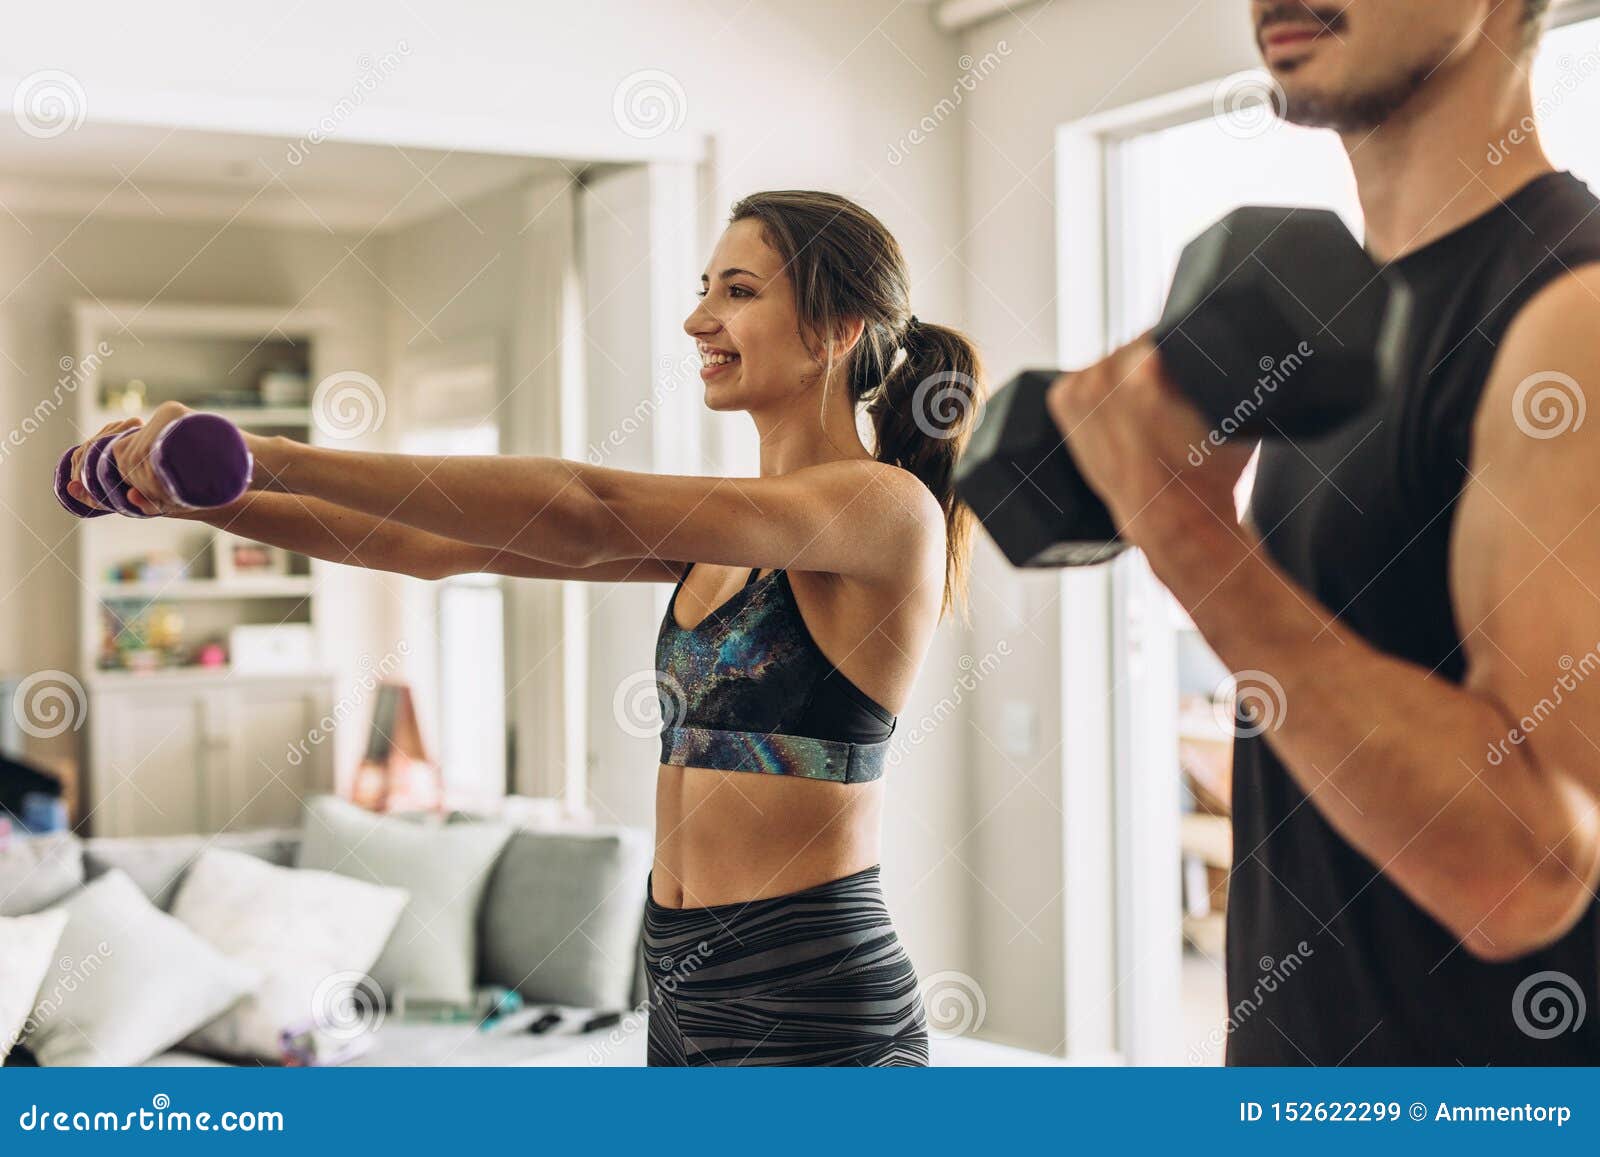 Sport, Working Out and Bodybuilding Concept with Girly Workout